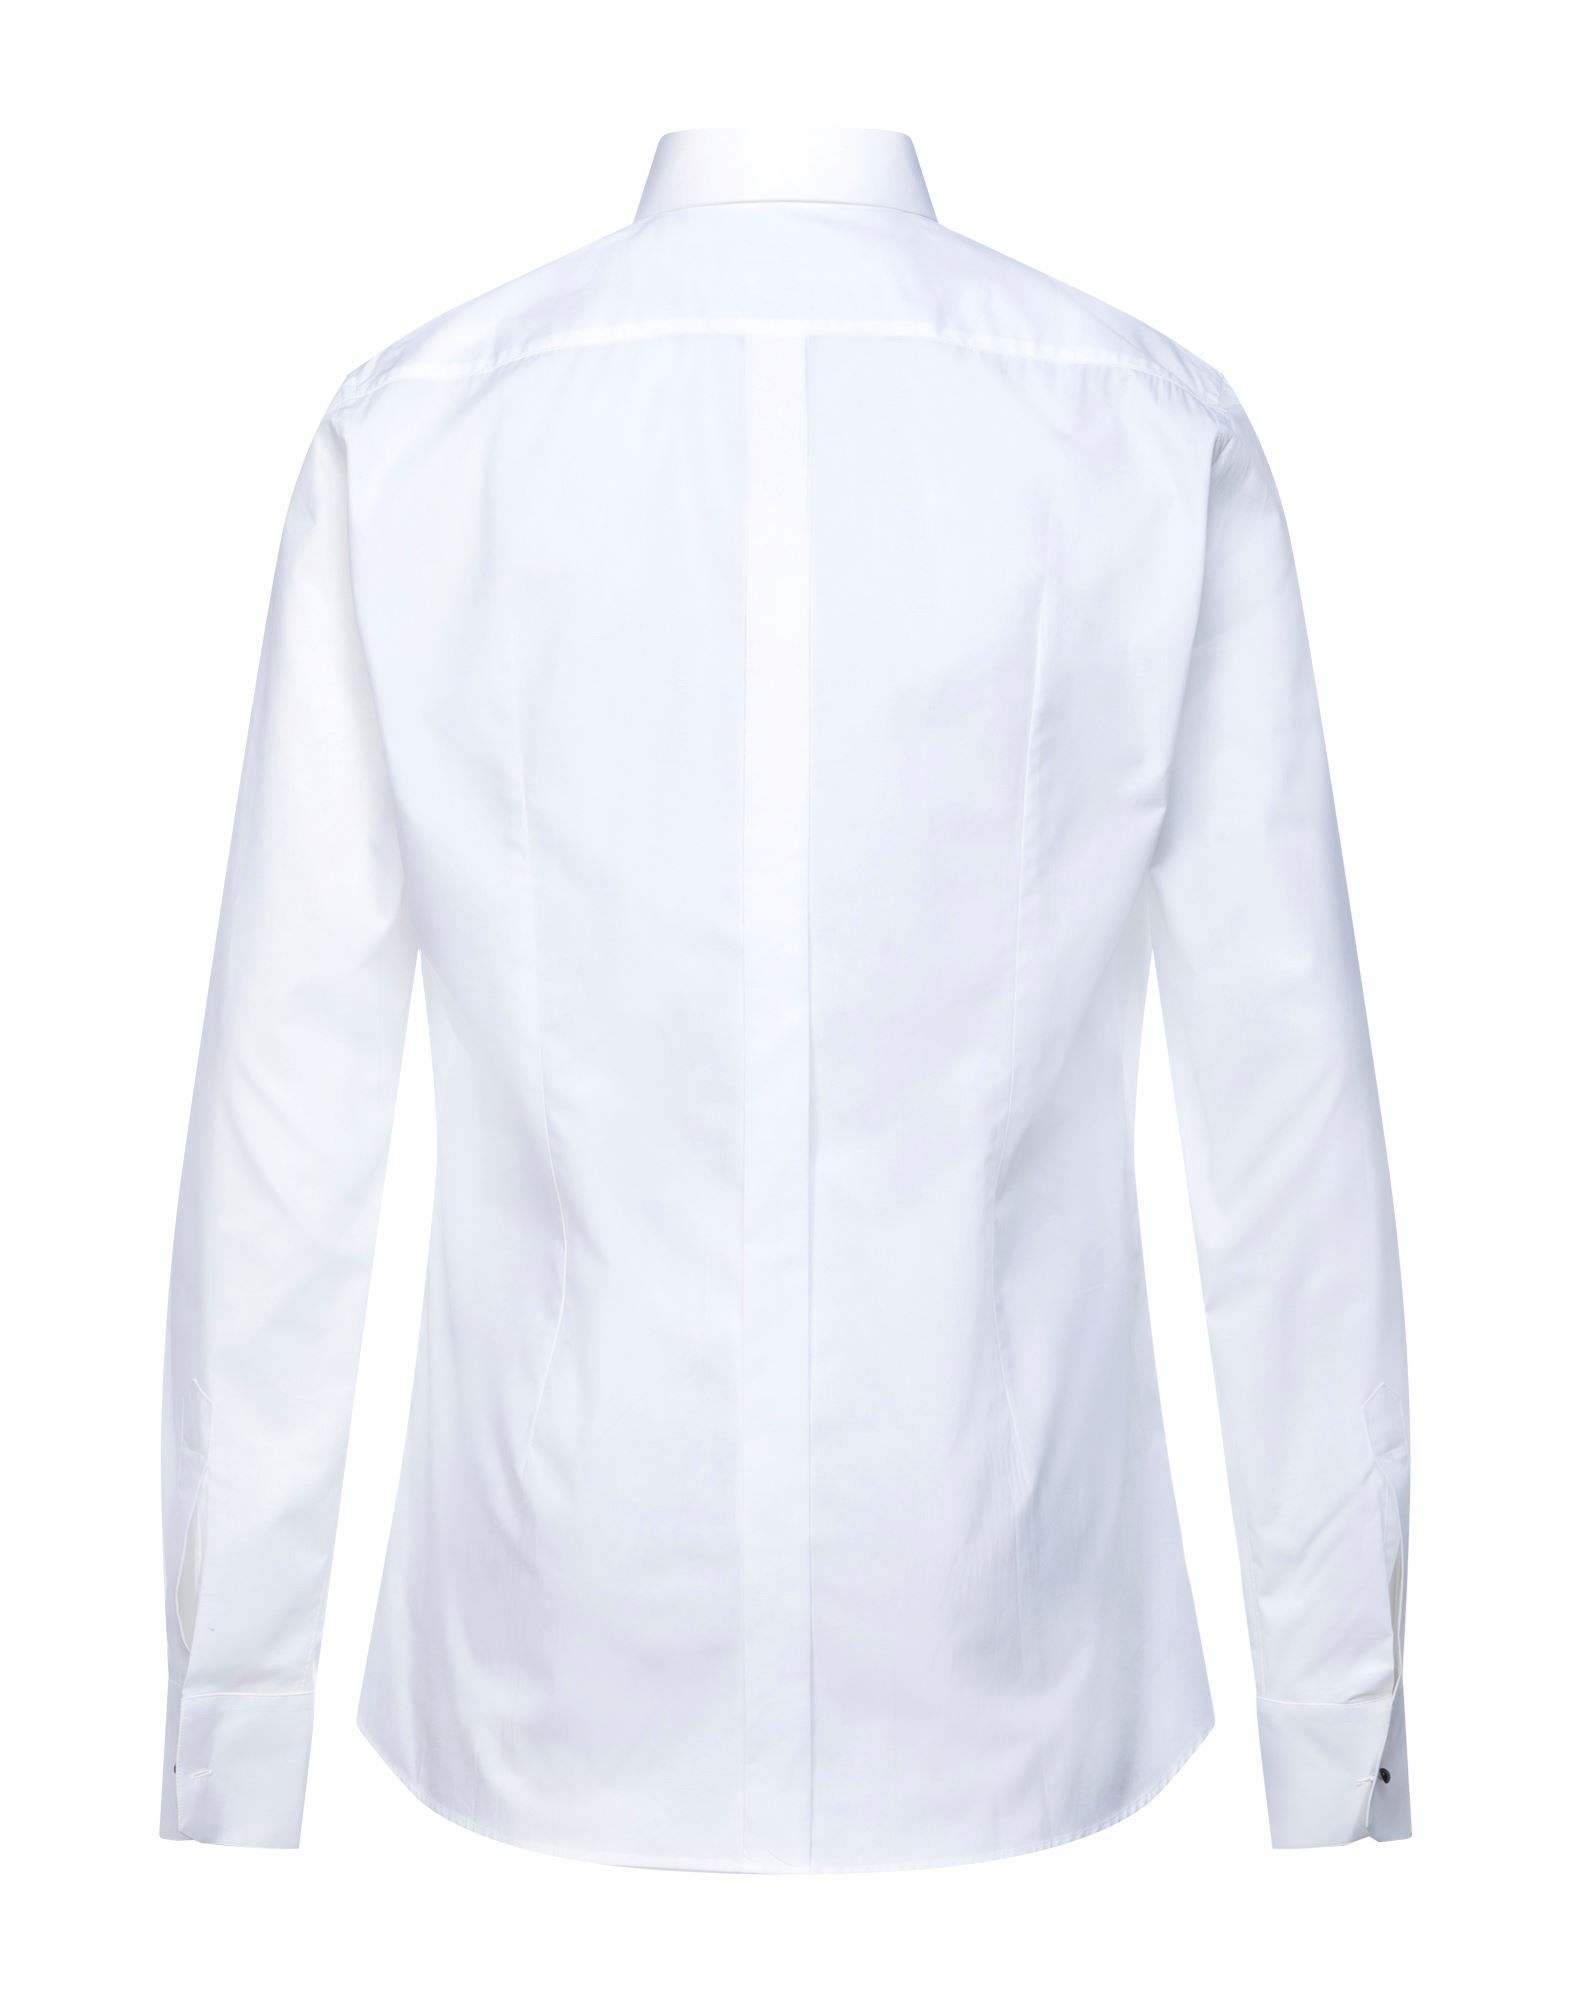 plain weave, brand logo, contrasting applications, solid colour, front closure, button closing, long sleeves, buttoned cuffs, classic neckline, no pockets, contains non-textile parts of animal origin, large sized